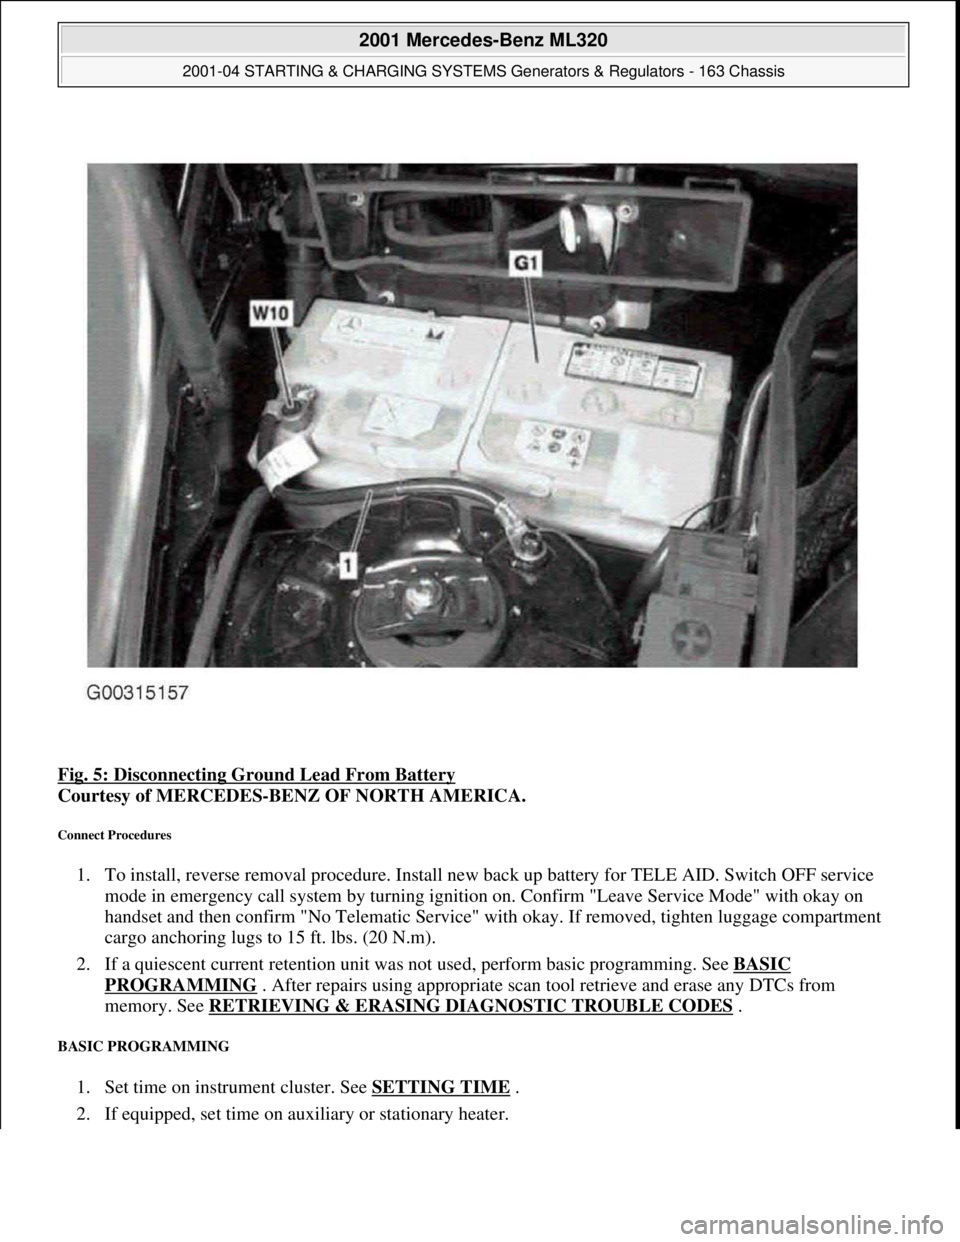 MERCEDES-BENZ ML320 1997  Complete Repair Manual Fig. 5: Disconnecting Ground Lead From Battery 
Courtesy of MERCEDES-BENZ OF NORTH AMERICA. 
Connect Procedures 
1. To install, reverse removal procedure. Install new back up battery for TELE AID. Swi